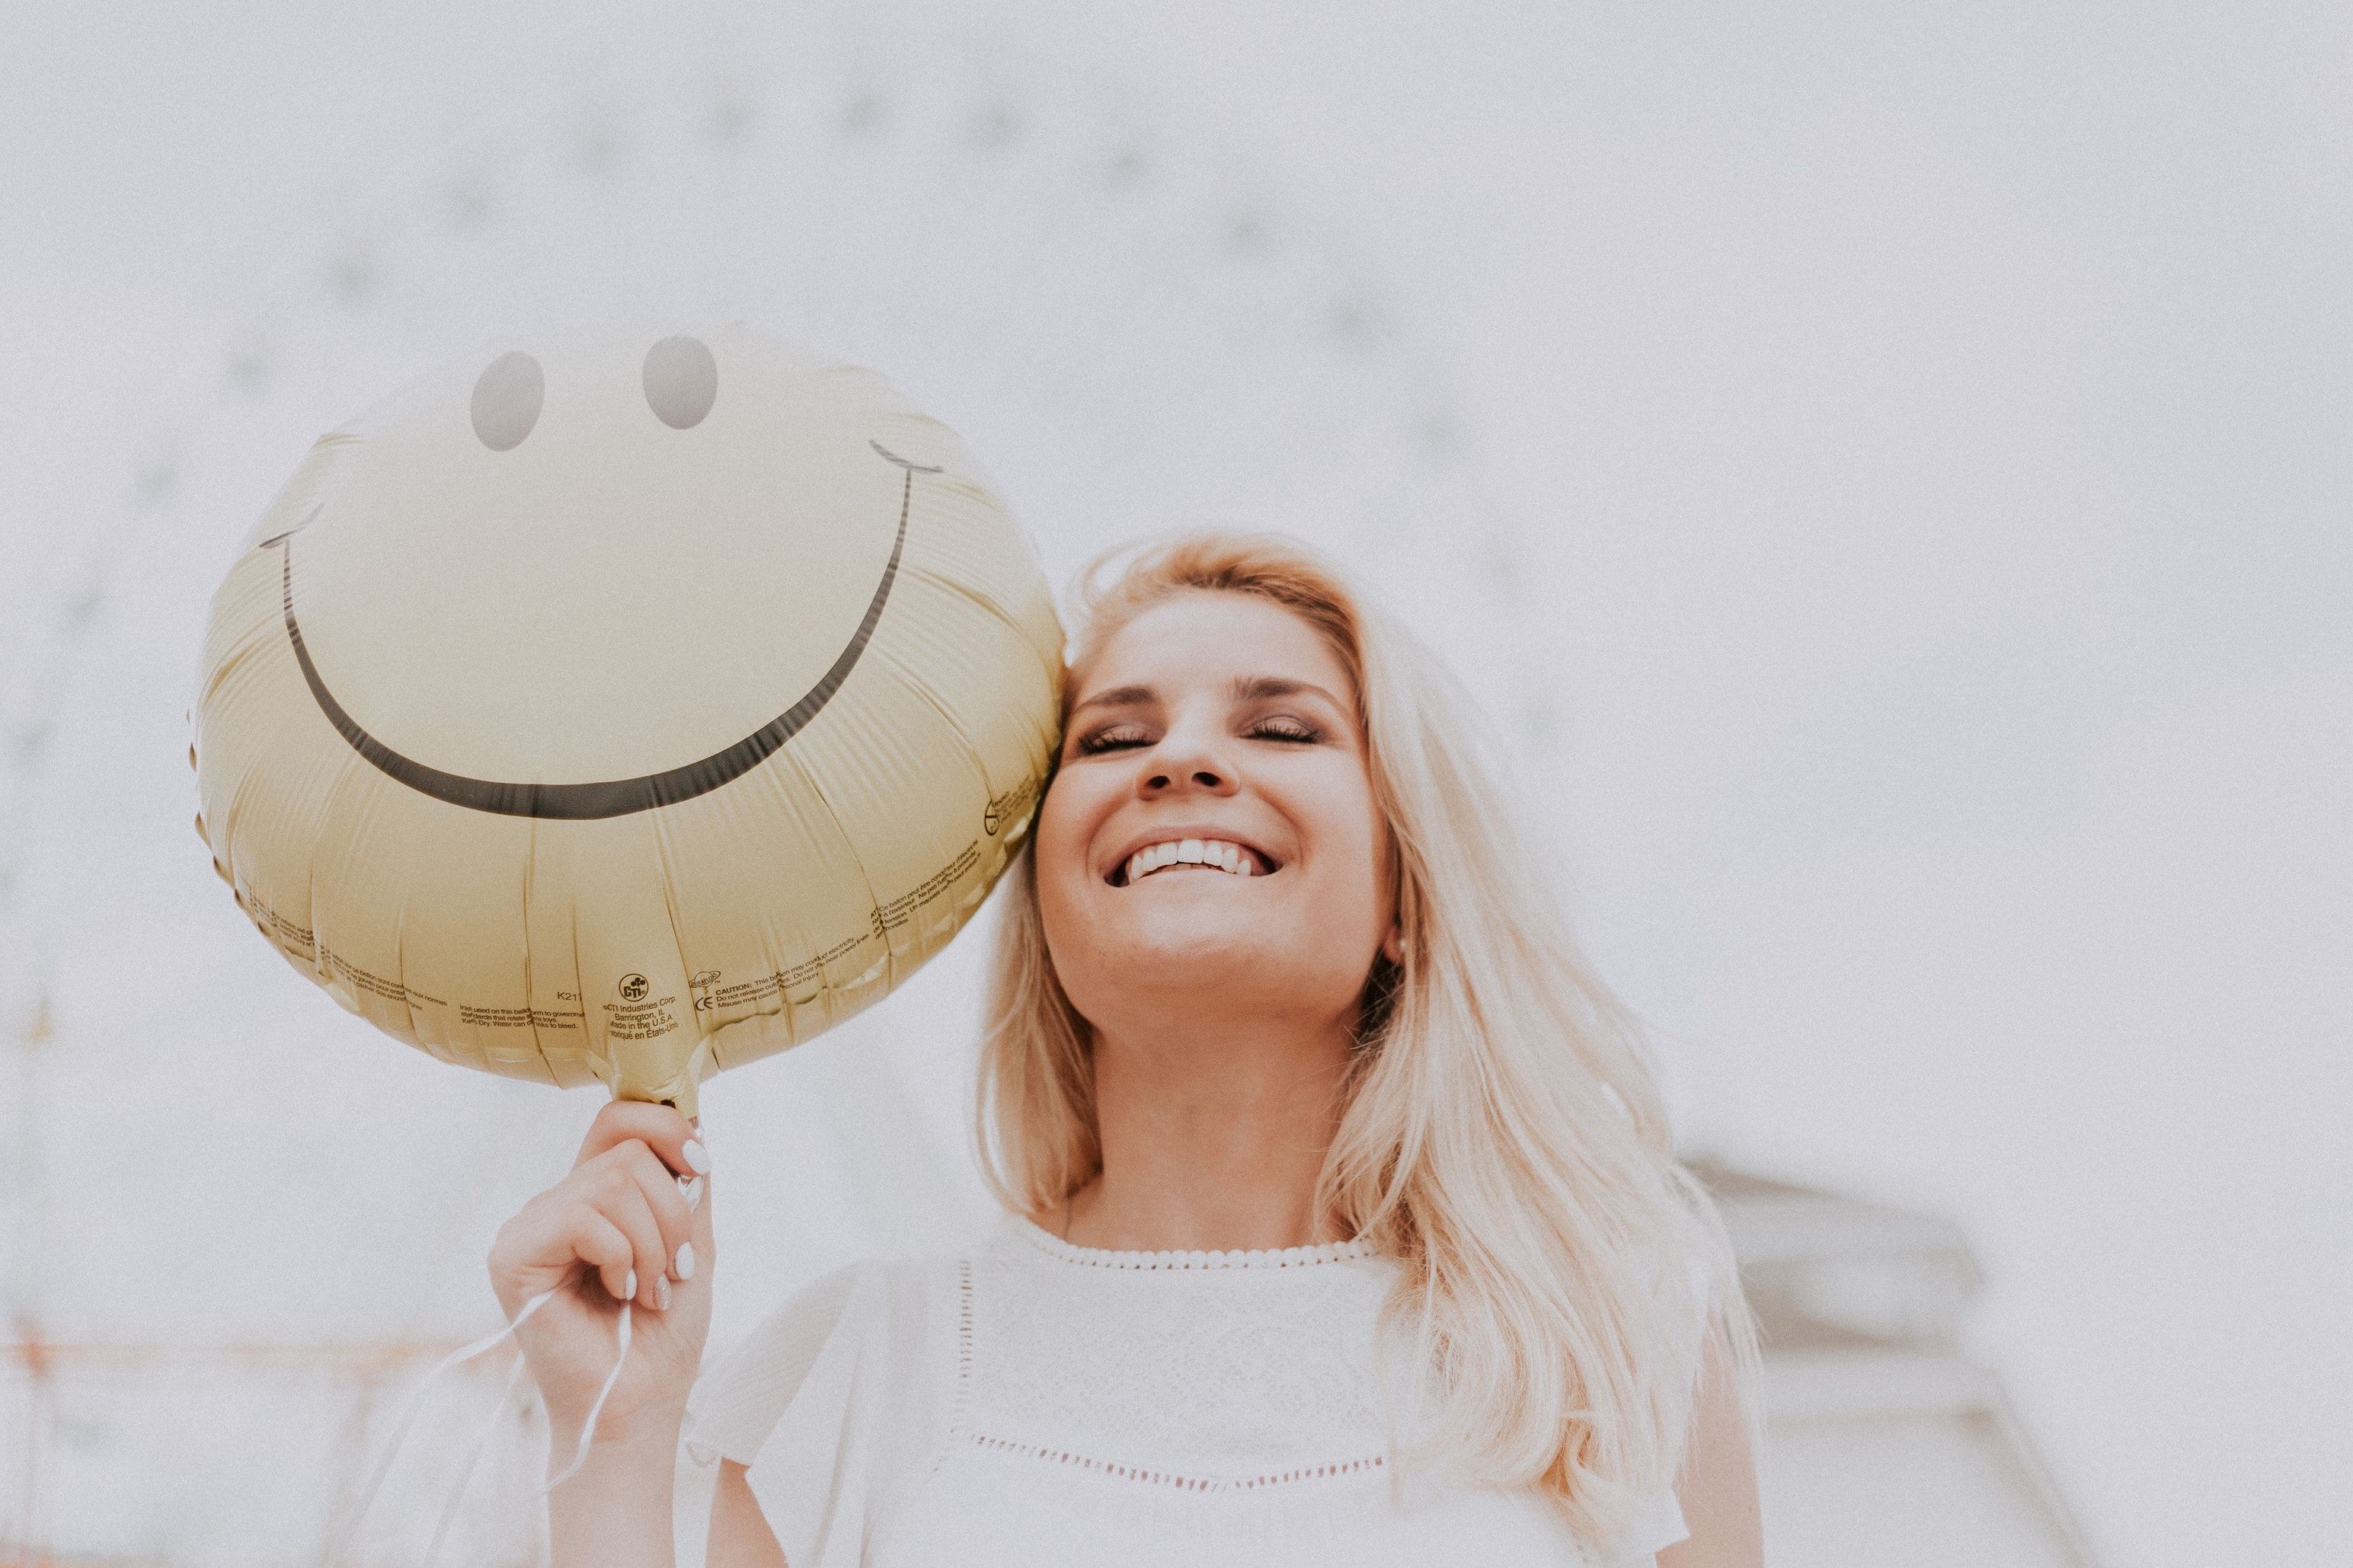 Blonde girl smiles in front of ferris wheel, holding smiley-face helium balloon